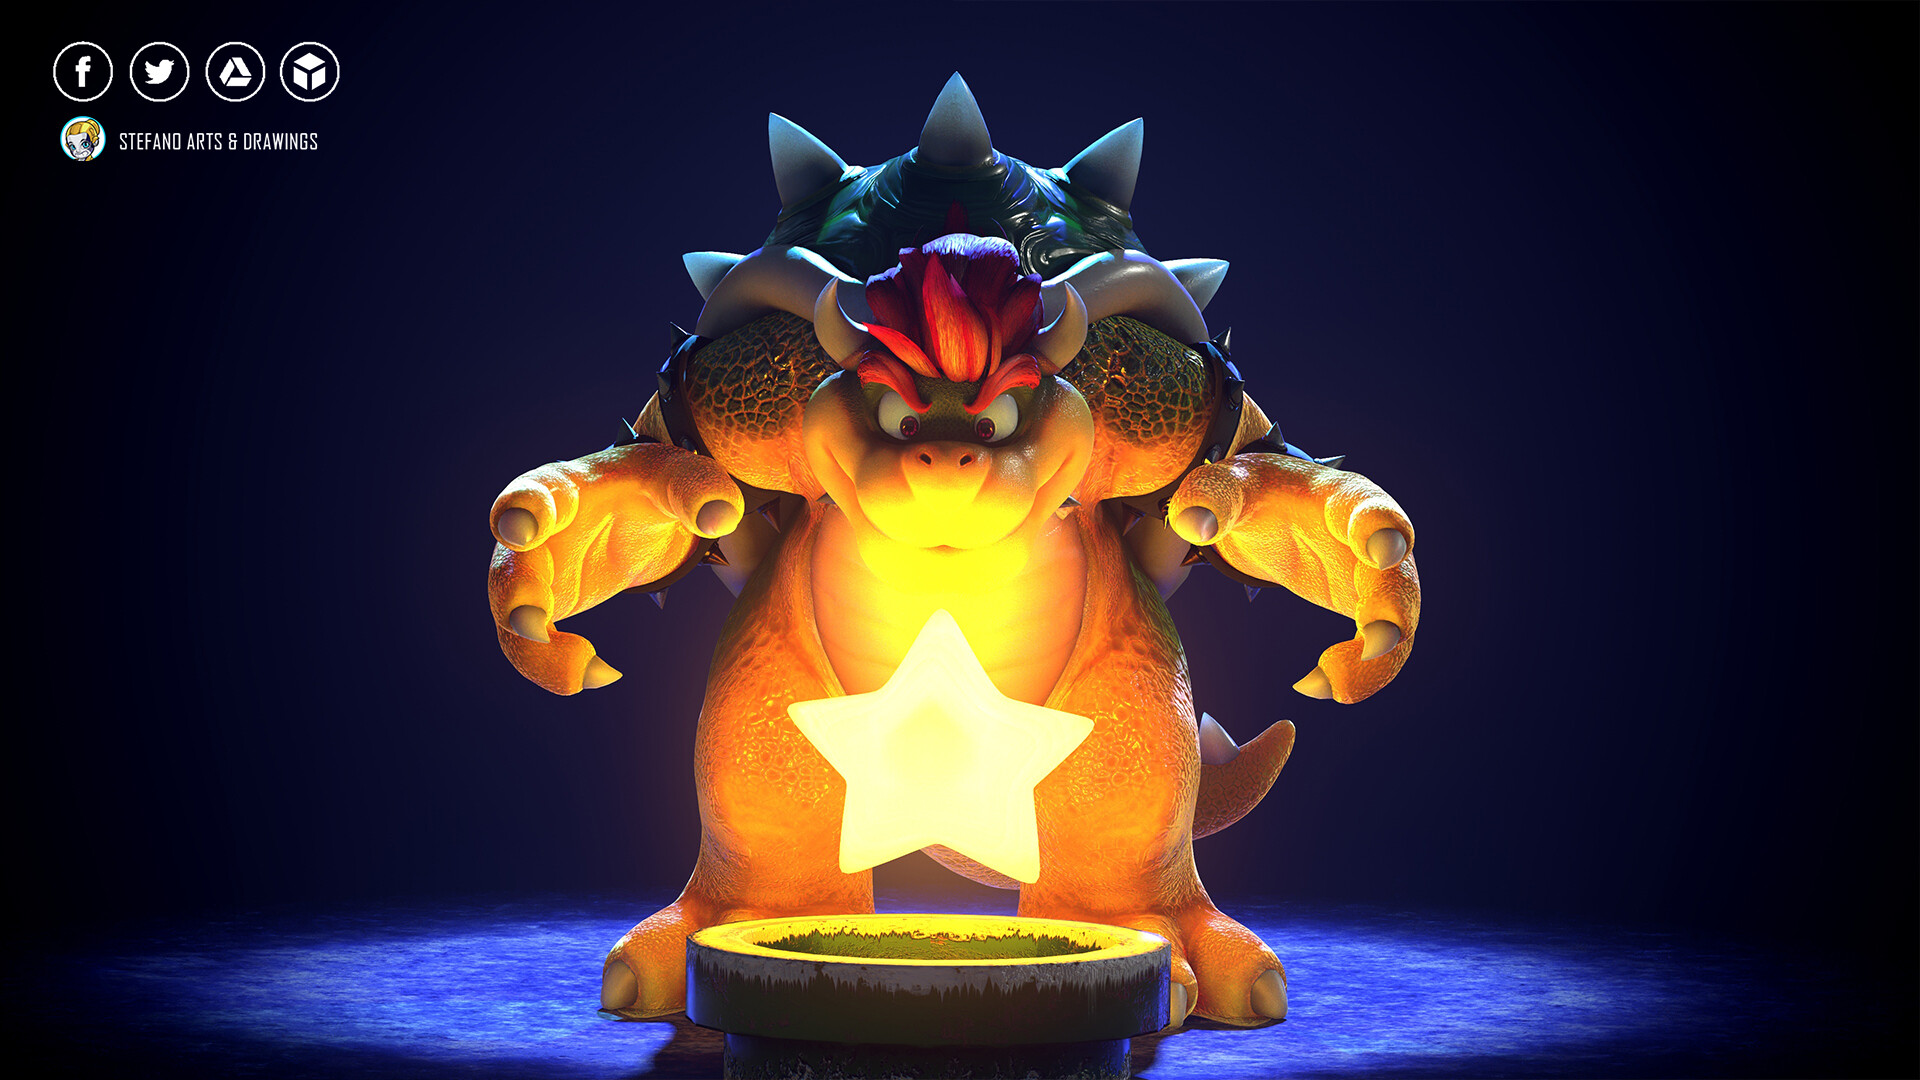 MARIO MOVIE's BOWSER - Fan Homage (LowPoly) - 3D model by Stefano